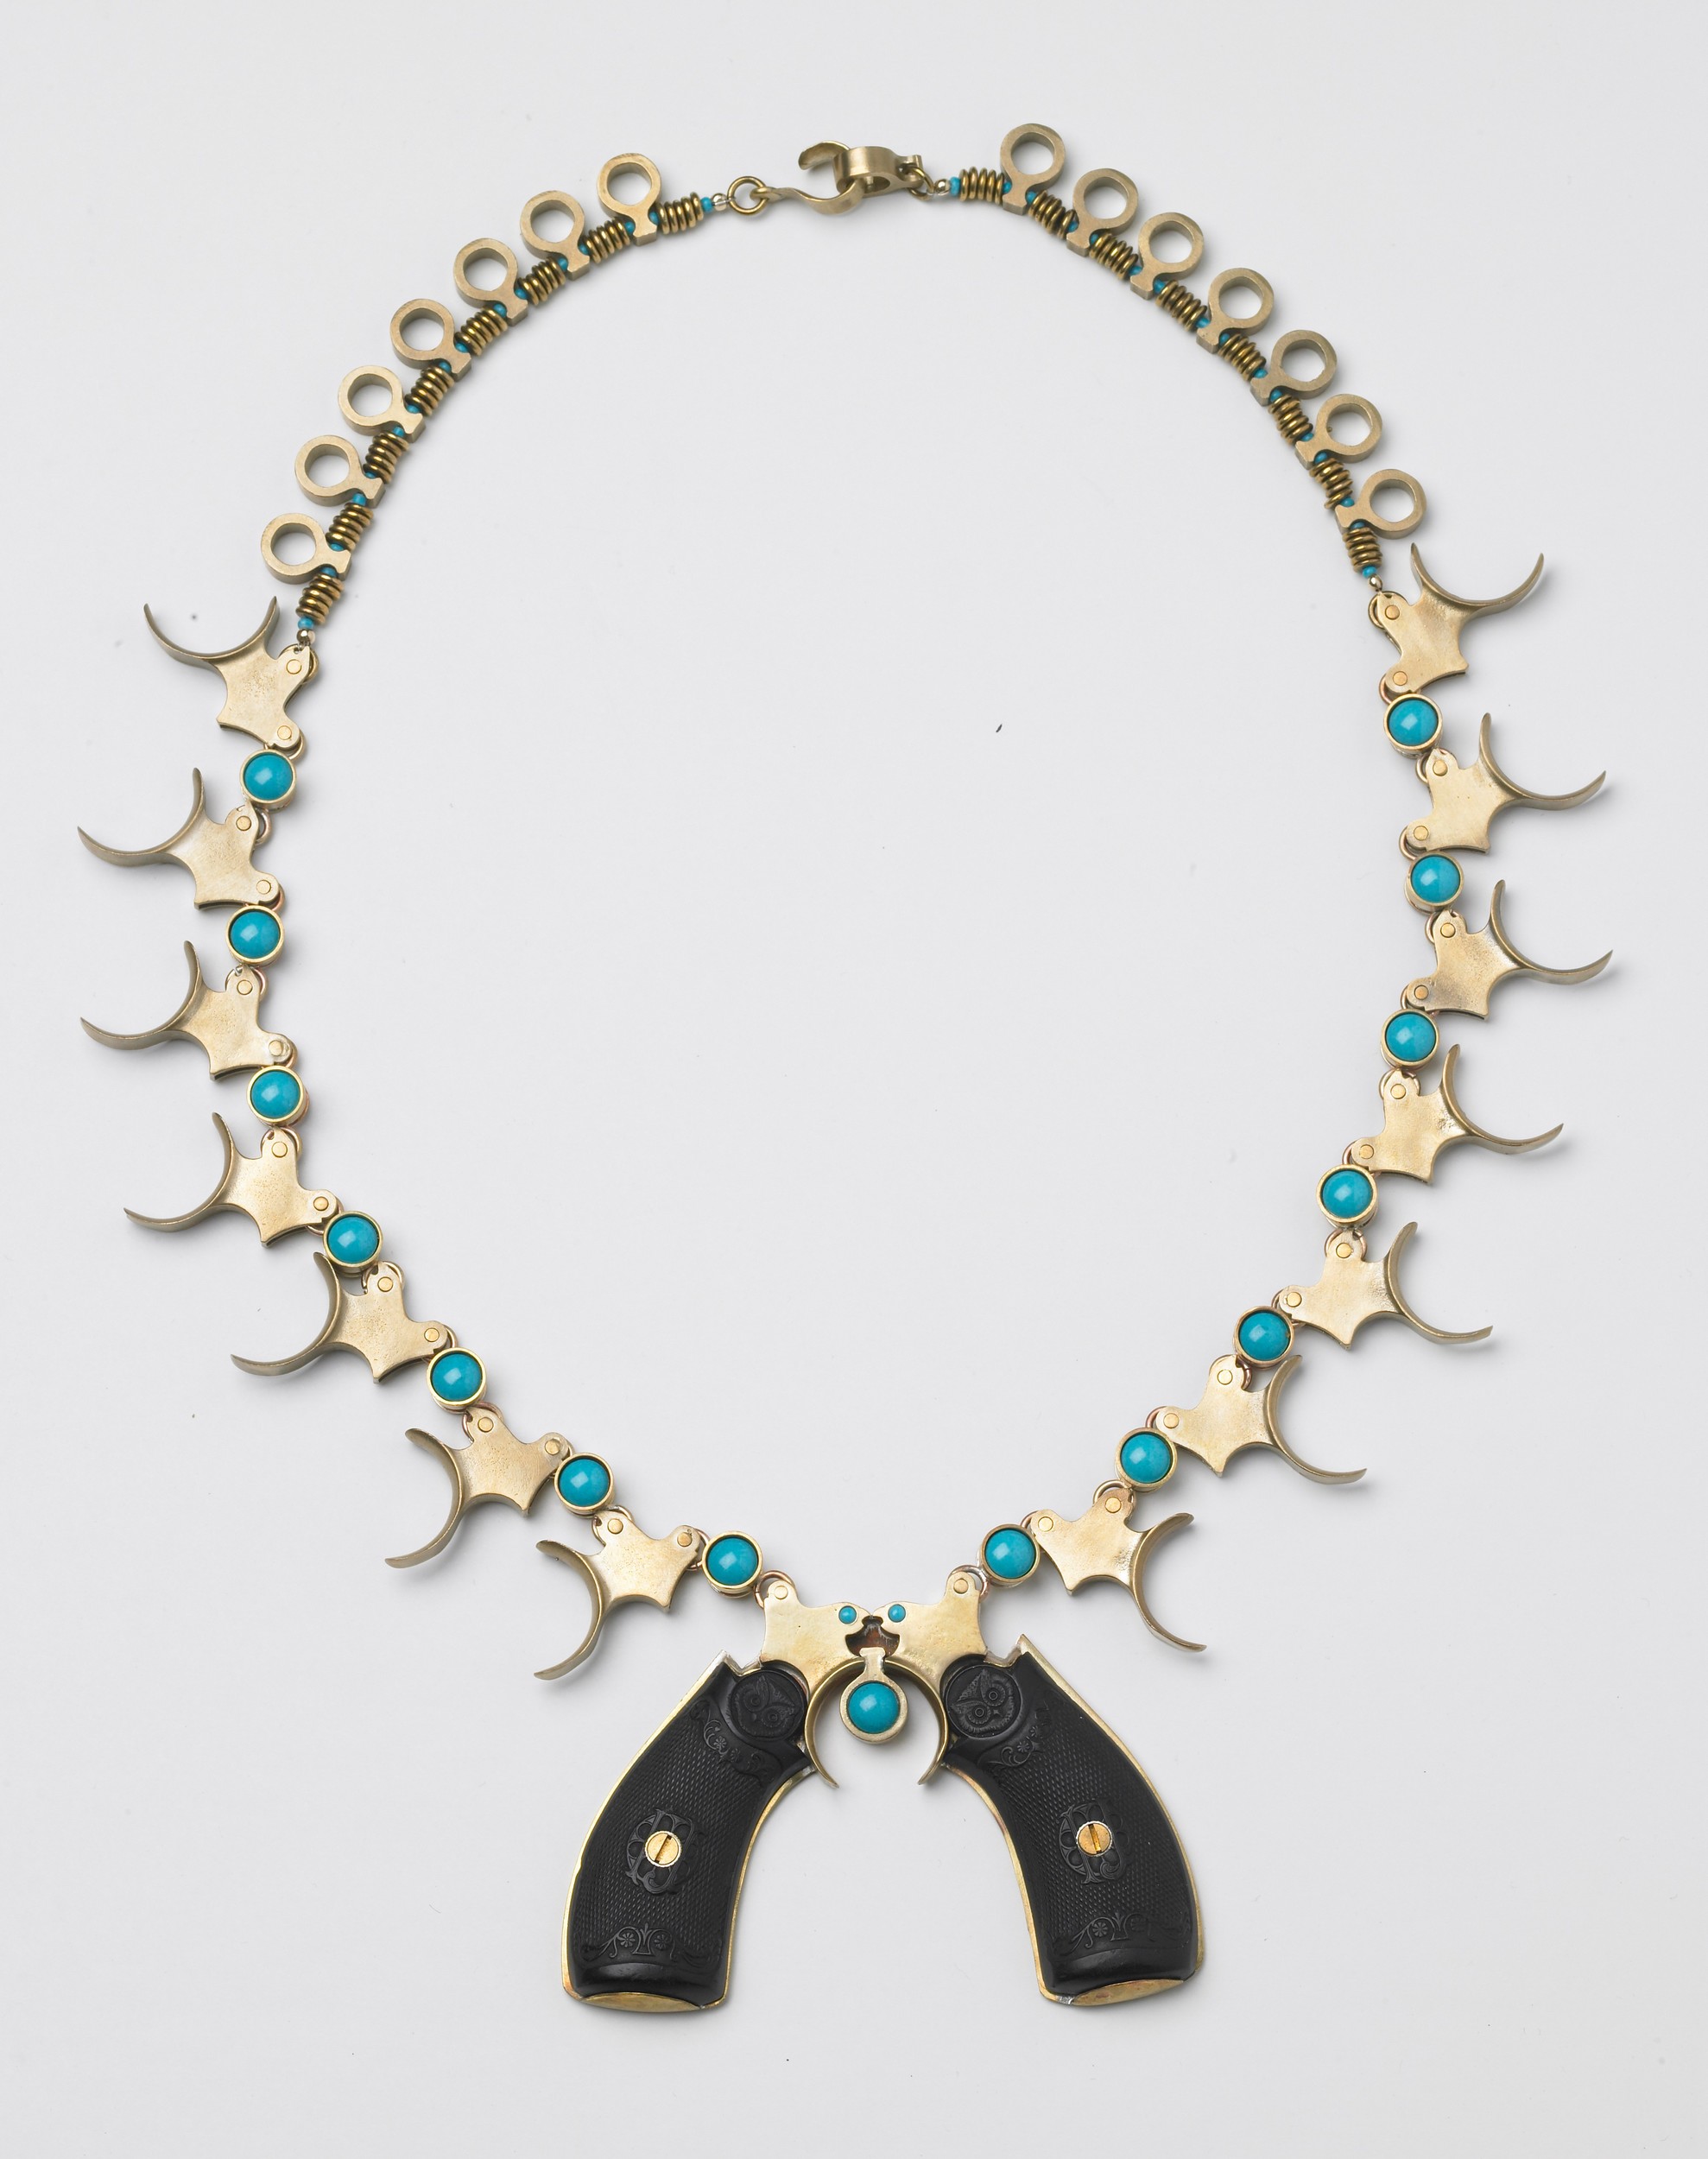 A "squash blossom" necklace created by Warren artist LeeAnn Herreid. According to Herreid, her involvement in the project has inspired many subsequent works.